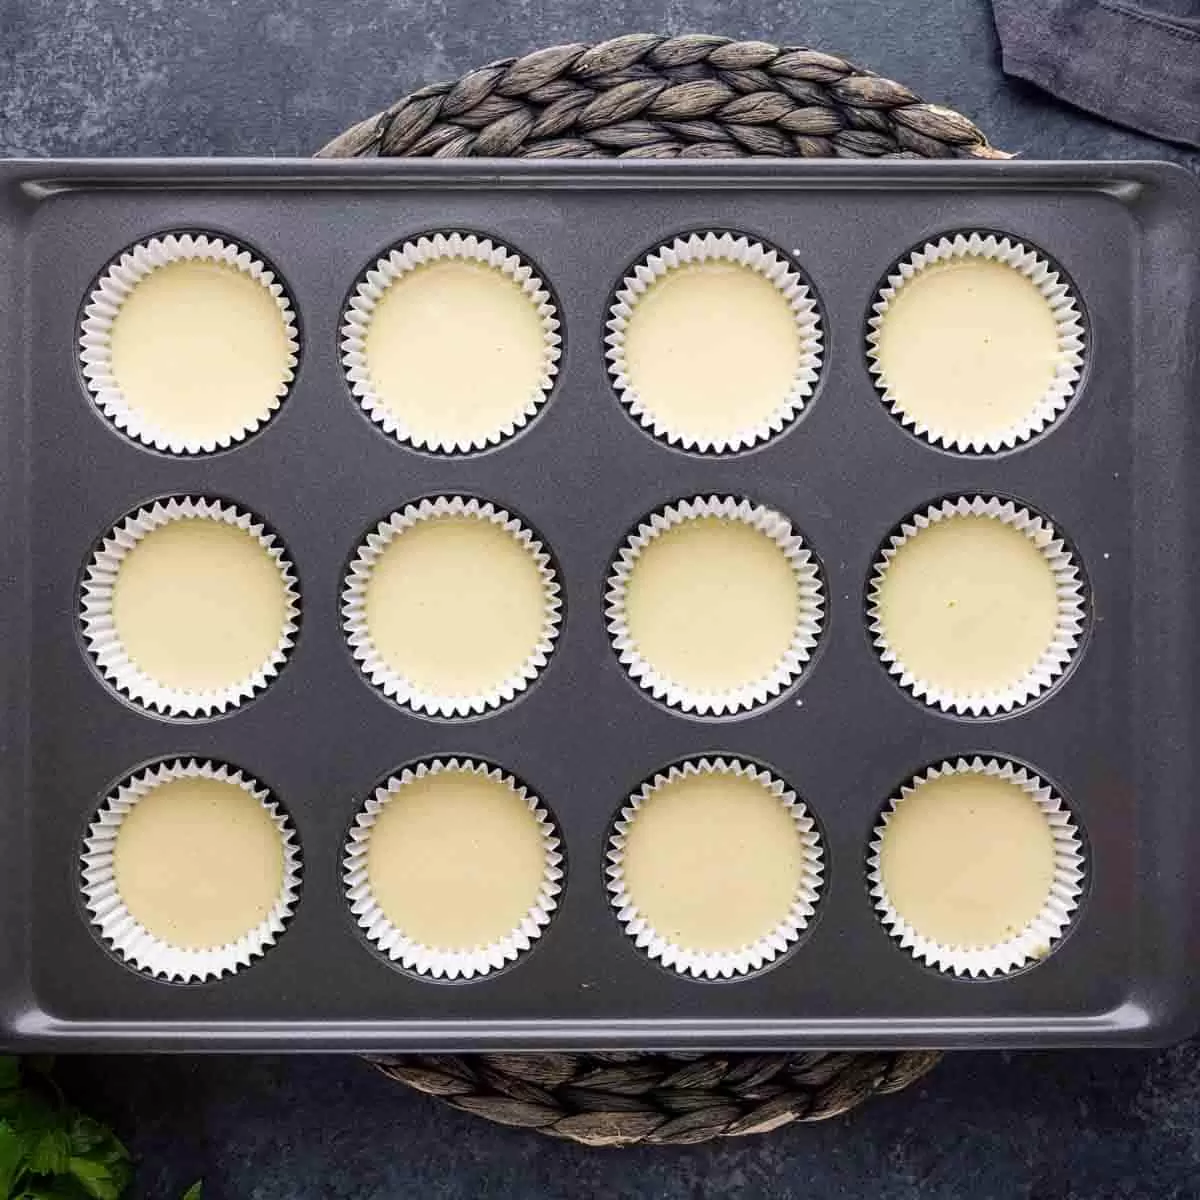 A muffin tin filled with Mini cheesecake cupcakes.